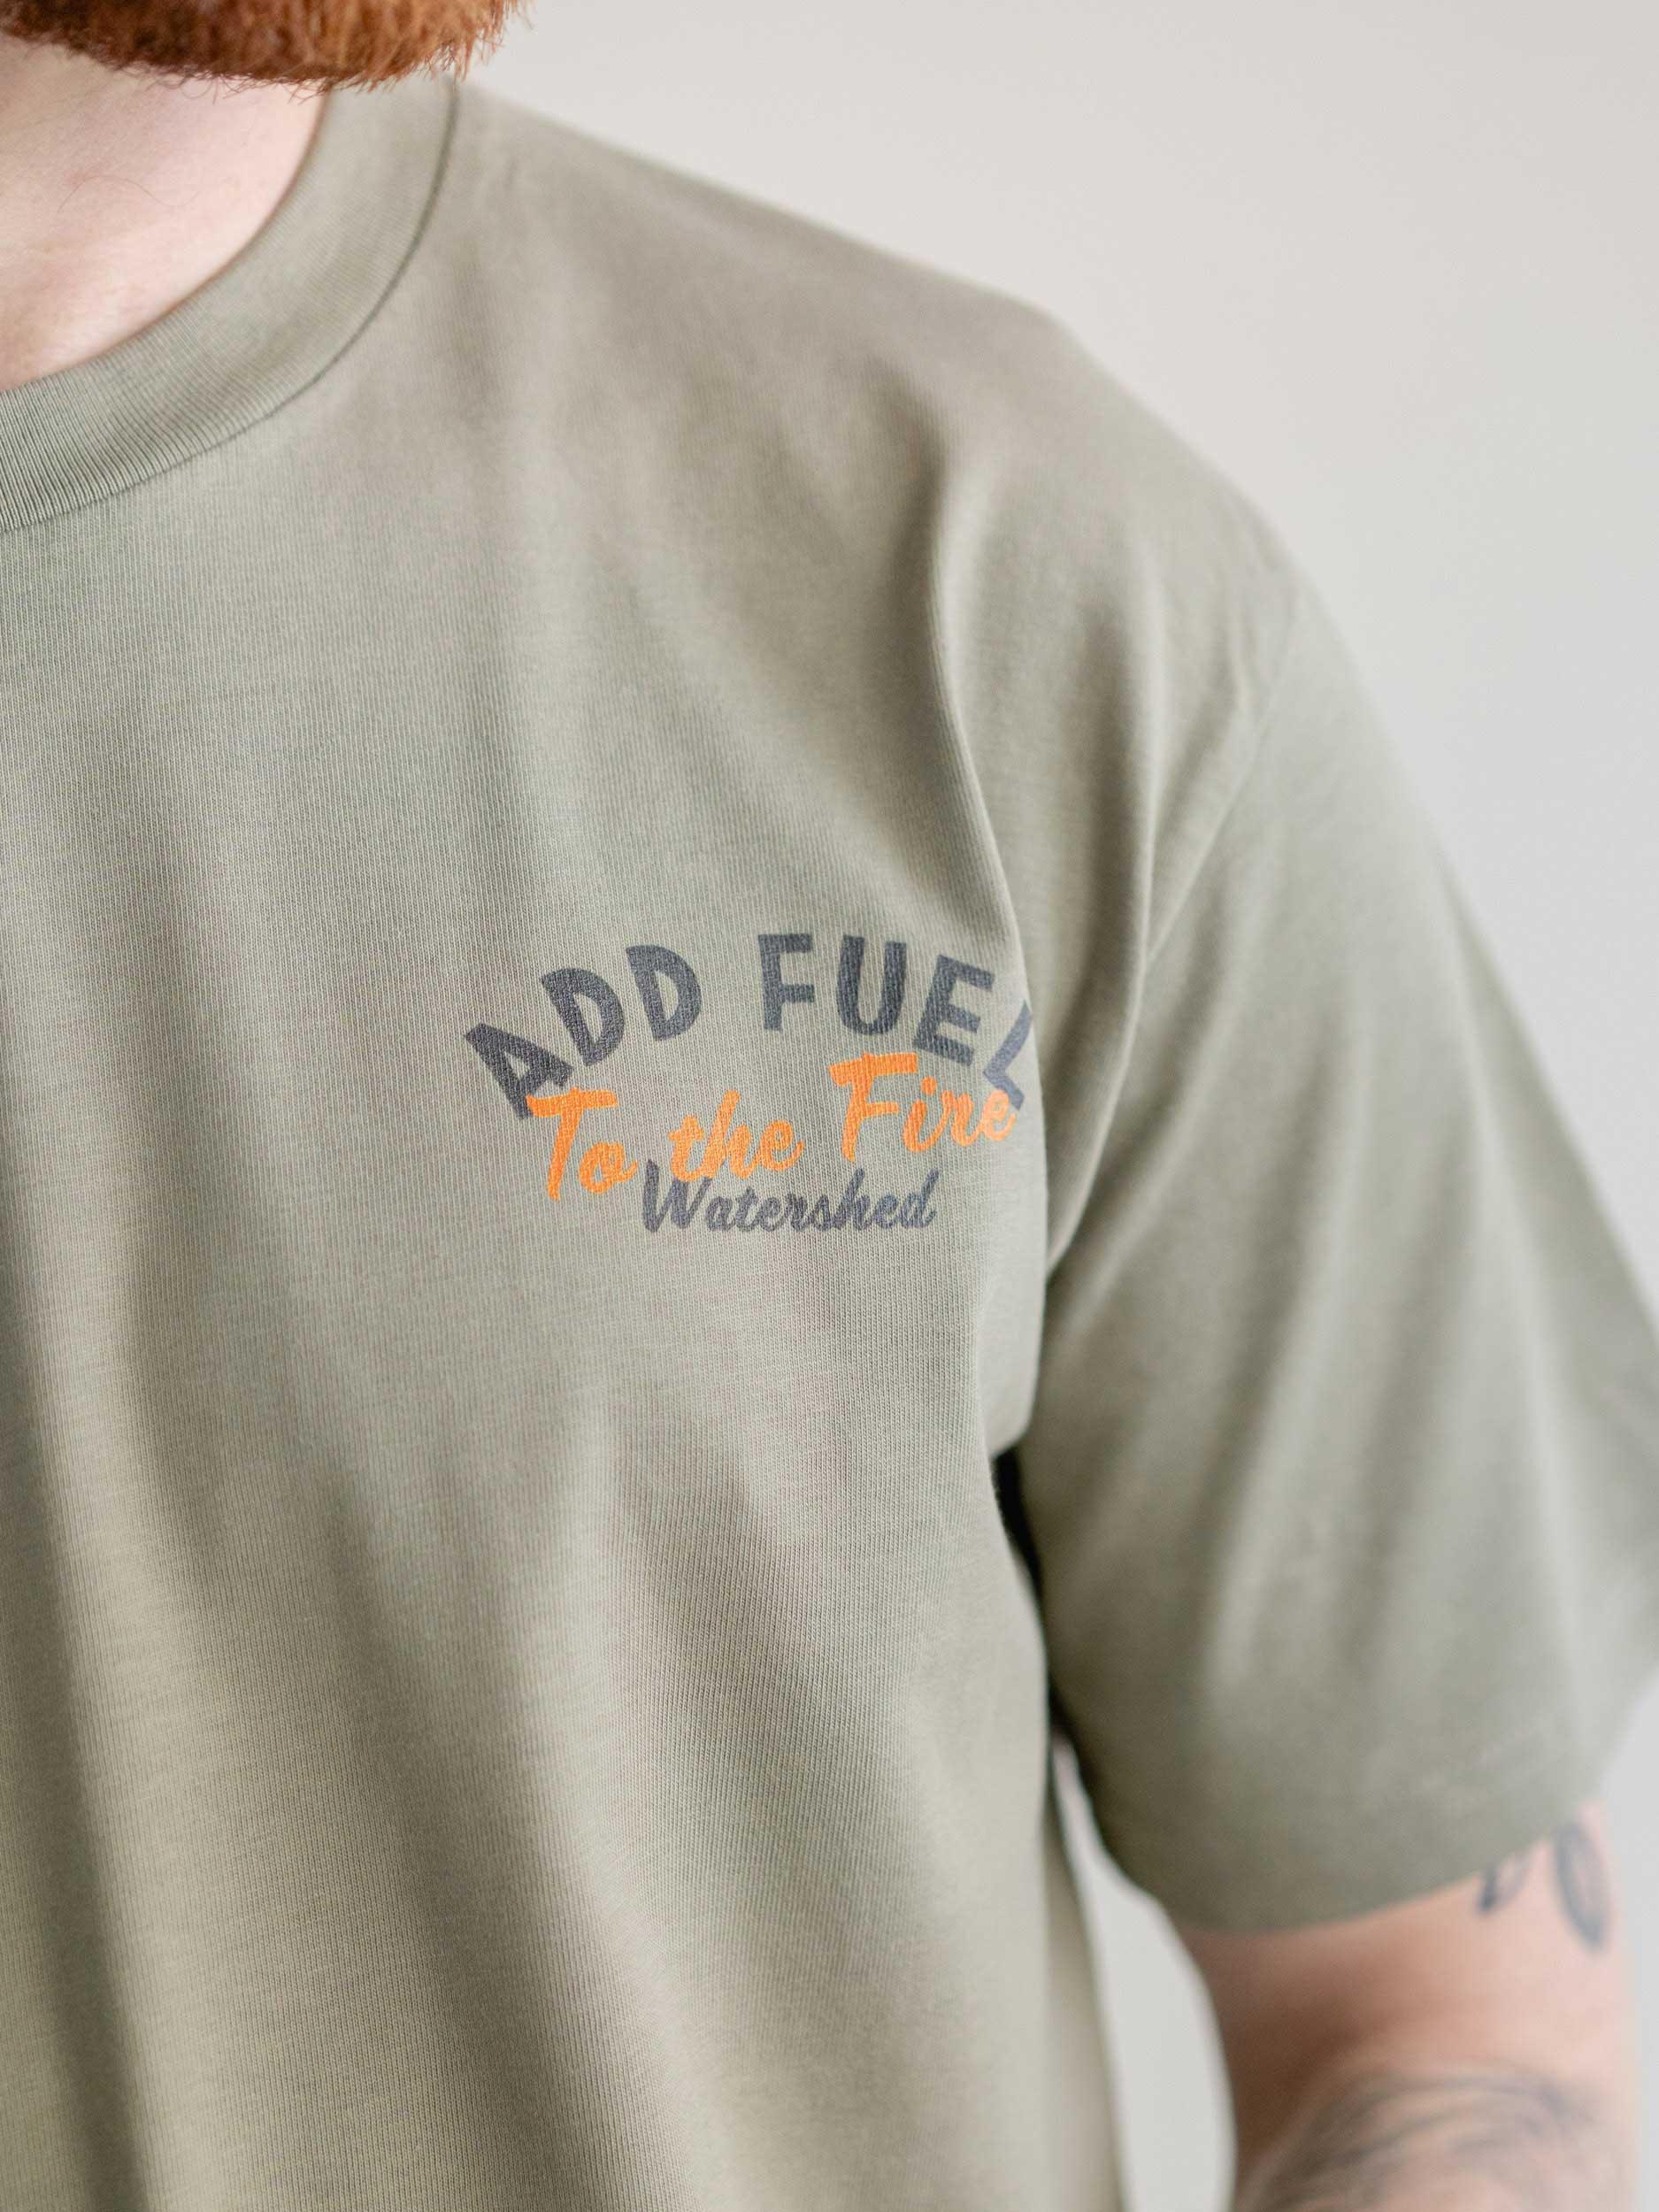 Add Fuel T-Shirt - Watershed Brand